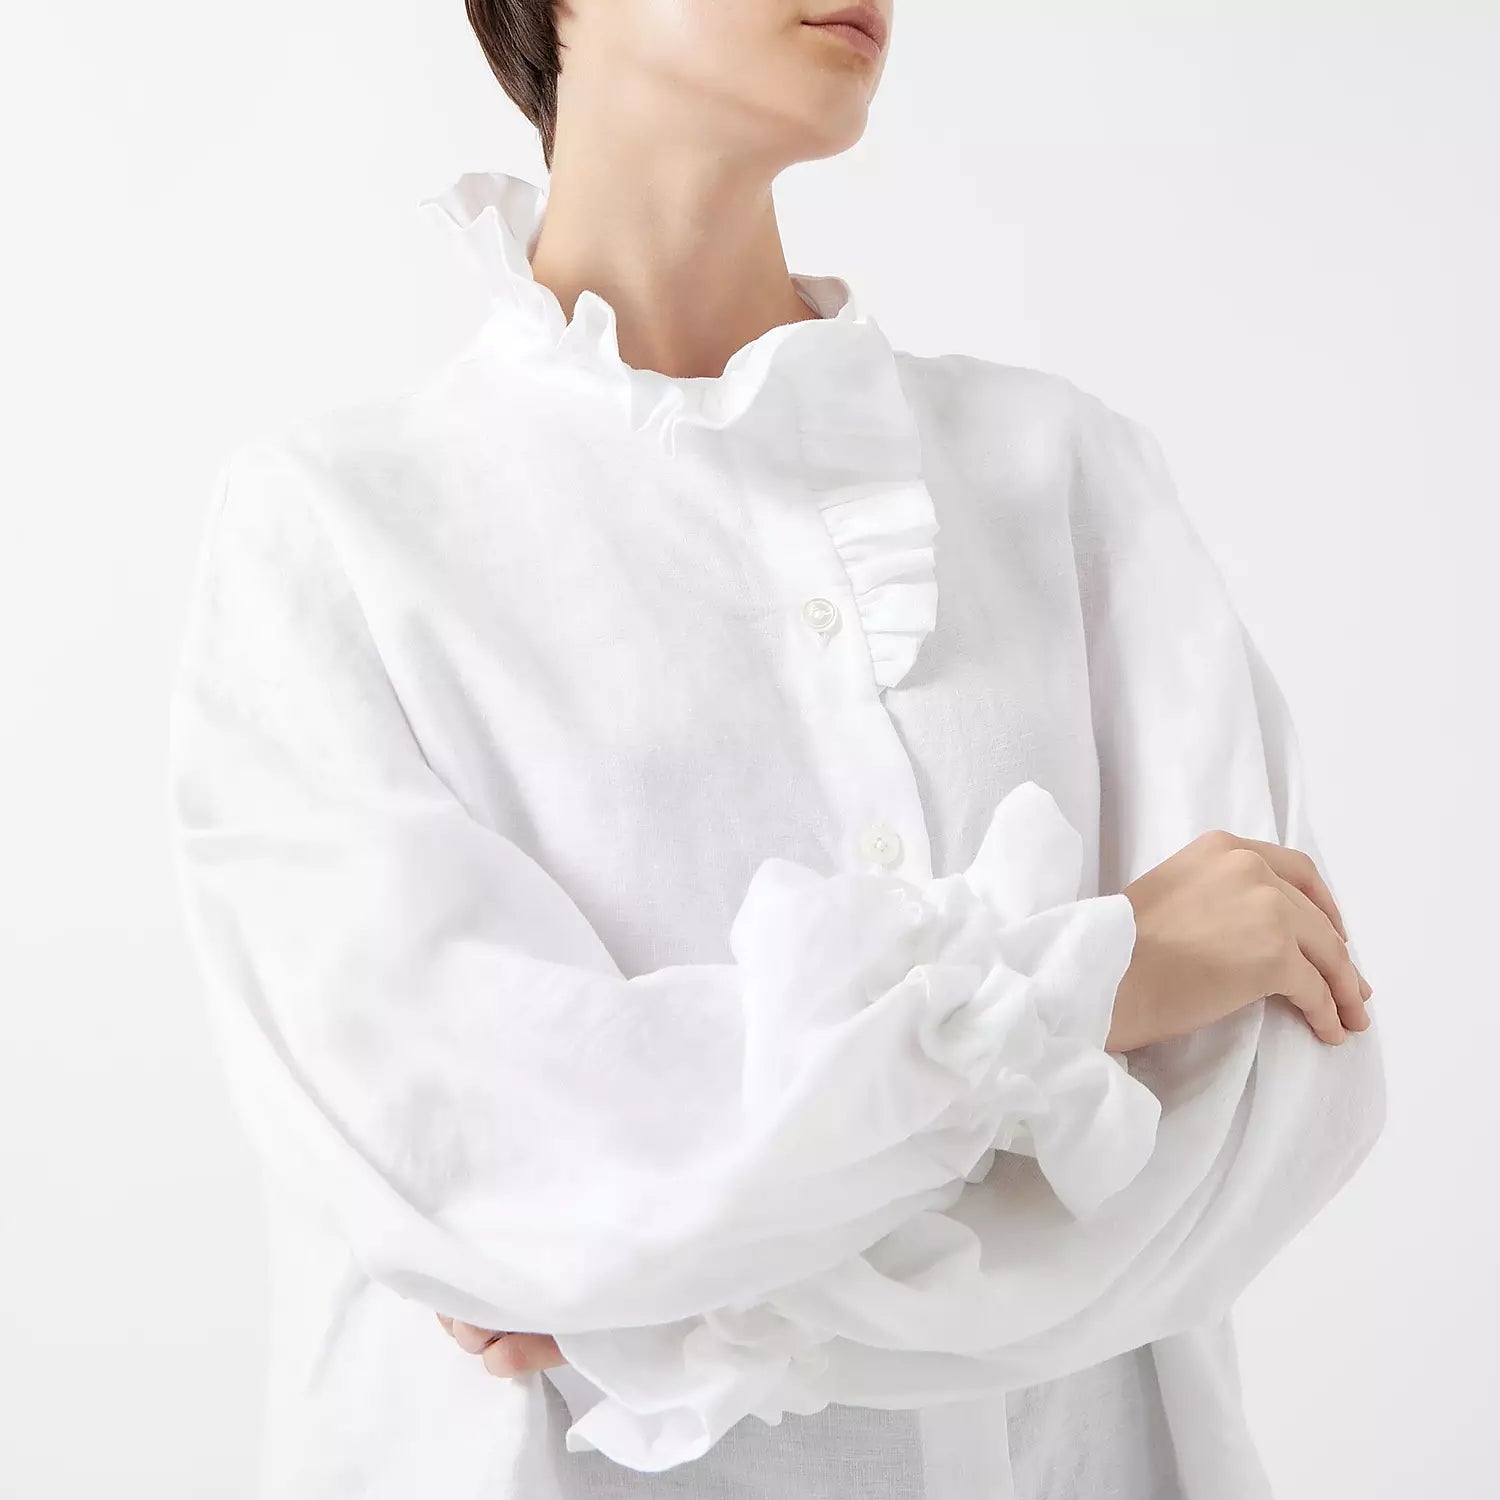 MARSHMALLOW- WHITE | An updated colourway of our favourite 'Marshmallow Blouse' for AW23- created in a luxurious white linen, this one is a play on the classic white linen shirt. Like many of our styles, this one can be worn with buttons to the front or t